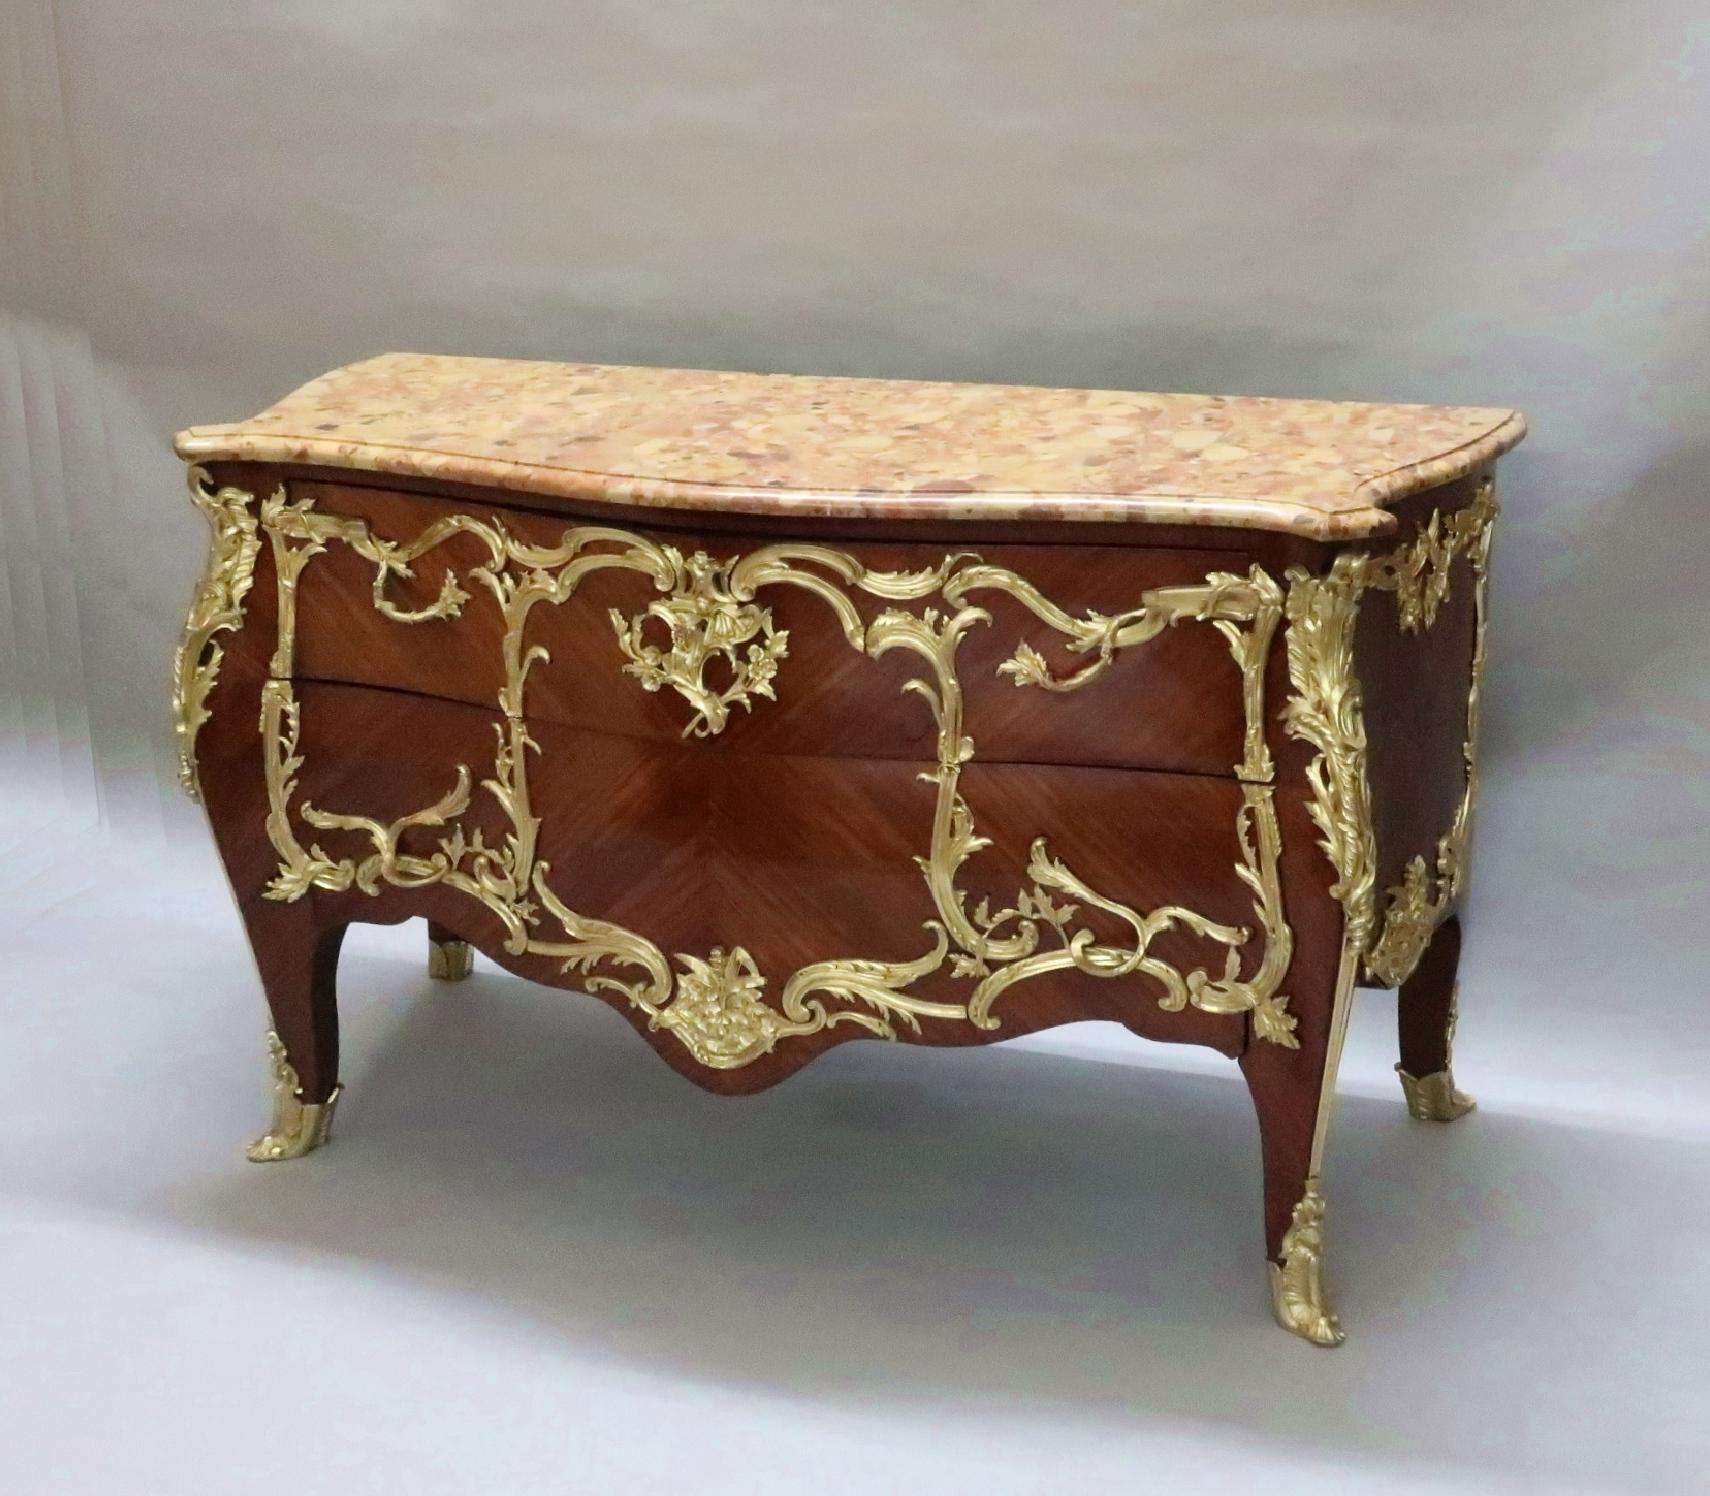 An outstanding French Louis XV style two drawer bombe shaped and serpentine commode chest of drawers by E. Kahn with original Breche d'Alep marble top. The commode has striking satiné quarter veneers and is adorned with exceptional scrolling foliate